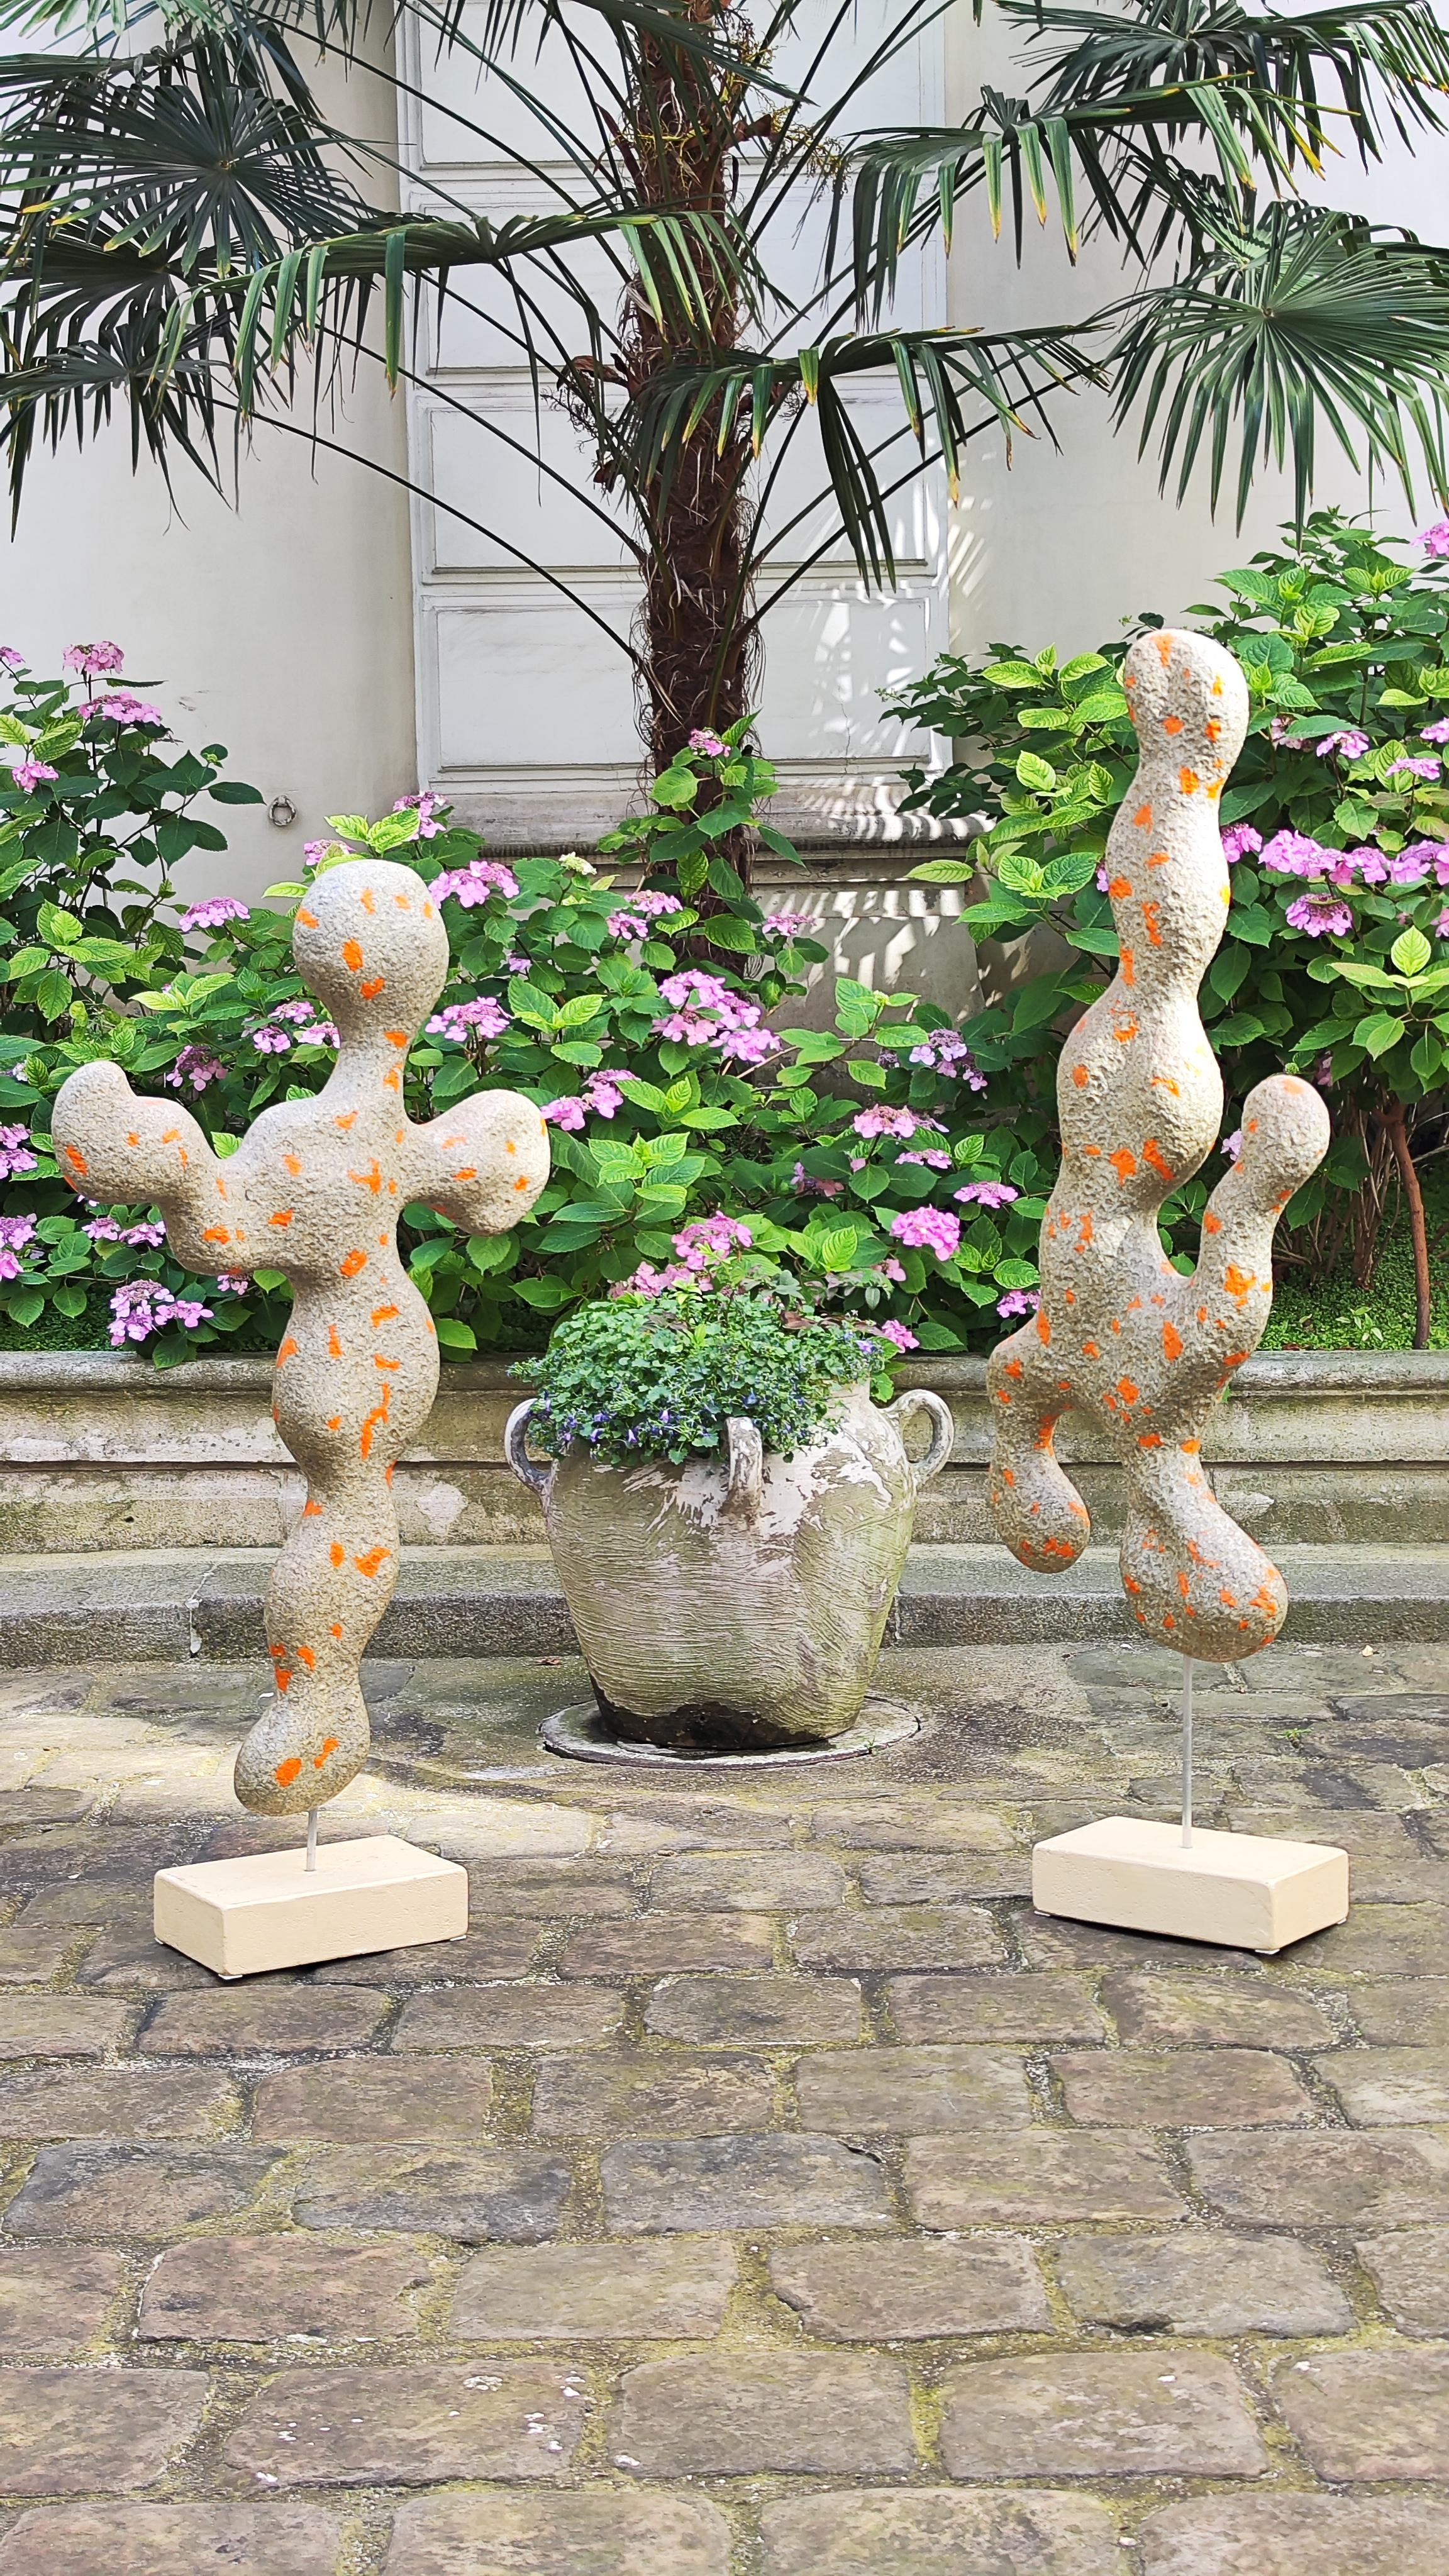 Superb pair of resin sculptures on pedestals, with rather organic shapes.
.
Abstract, illusionism, modernism.
.
Late 70s.
.
Origine : France.
.
In the style of Jean Arp.
.
Dimensions :

1st scumpture :
145 cm tall
52 cm wide

2nd